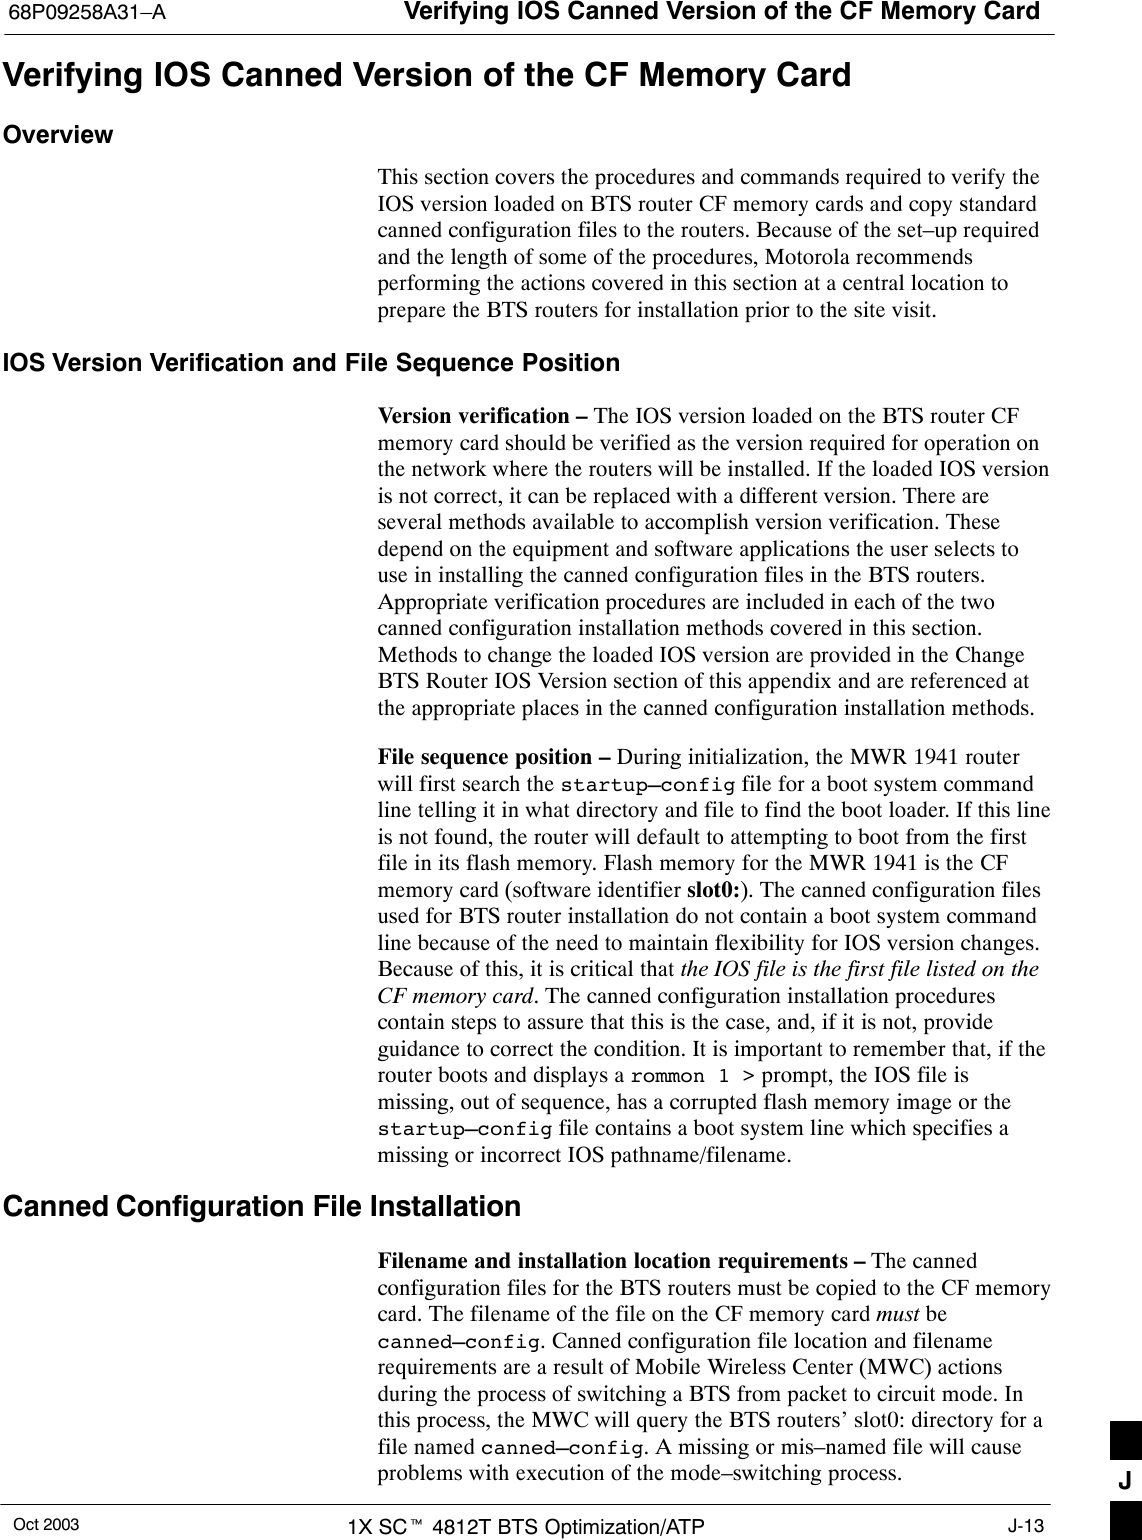 Verifying IOS Canned Version of the CF Memory Card68P09258A31–AOct 2003 1X SCt 4812T BTS Optimization/ATP J-13Verifying IOS Canned Version of the CF Memory CardOverviewThis section covers the procedures and commands required to verify theIOS version loaded on BTS router CF memory cards and copy standardcanned configuration files to the routers. Because of the set–up requiredand the length of some of the procedures, Motorola recommendsperforming the actions covered in this section at a central location toprepare the BTS routers for installation prior to the site visit.IOS Version Verification and File Sequence PositionVersion verification – The IOS version loaded on the BTS router CFmemory card should be verified as the version required for operation onthe network where the routers will be installed. If the loaded IOS versionis not correct, it can be replaced with a different version. There areseveral methods available to accomplish version verification. Thesedepend on the equipment and software applications the user selects touse in installing the canned configuration files in the BTS routers.Appropriate verification procedures are included in each of the twocanned configuration installation methods covered in this section.Methods to change the loaded IOS version are provided in the ChangeBTS Router IOS Version section of this appendix and are referenced atthe appropriate places in the canned configuration installation methods.File sequence position – During initialization, the MWR 1941 routerwill first search the startup–config file for a boot system commandline telling it in what directory and file to find the boot loader. If this lineis not found, the router will default to attempting to boot from the firstfile in its flash memory. Flash memory for the MWR 1941 is the CFmemory card (software identifier slot0:). The canned configuration filesused for BTS router installation do not contain a boot system commandline because of the need to maintain flexibility for IOS version changes.Because of this, it is critical that the IOS file is the first file listed on theCF memory card. The canned configuration installation procedurescontain steps to assure that this is the case, and, if it is not, provideguidance to correct the condition. It is important to remember that, if therouter boots and displays a rommon 1 &gt; prompt, the IOS file ismissing, out of sequence, has a corrupted flash memory image or thestartup–config file contains a boot system line which specifies amissing or incorrect IOS pathname/filename.Canned Configuration File InstallationFilename and installation location requirements – The cannedconfiguration files for the BTS routers must be copied to the CF memorycard. The filename of the file on the CF memory card must becanned–config. Canned configuration file location and filenamerequirements are a result of Mobile Wireless Center (MWC) actionsduring the process of switching a BTS from packet to circuit mode. Inthis process, the MWC will query the BTS routers’ slot0: directory for afile named canned–config. A missing or mis–named file will causeproblems with execution of the mode–switching process. J